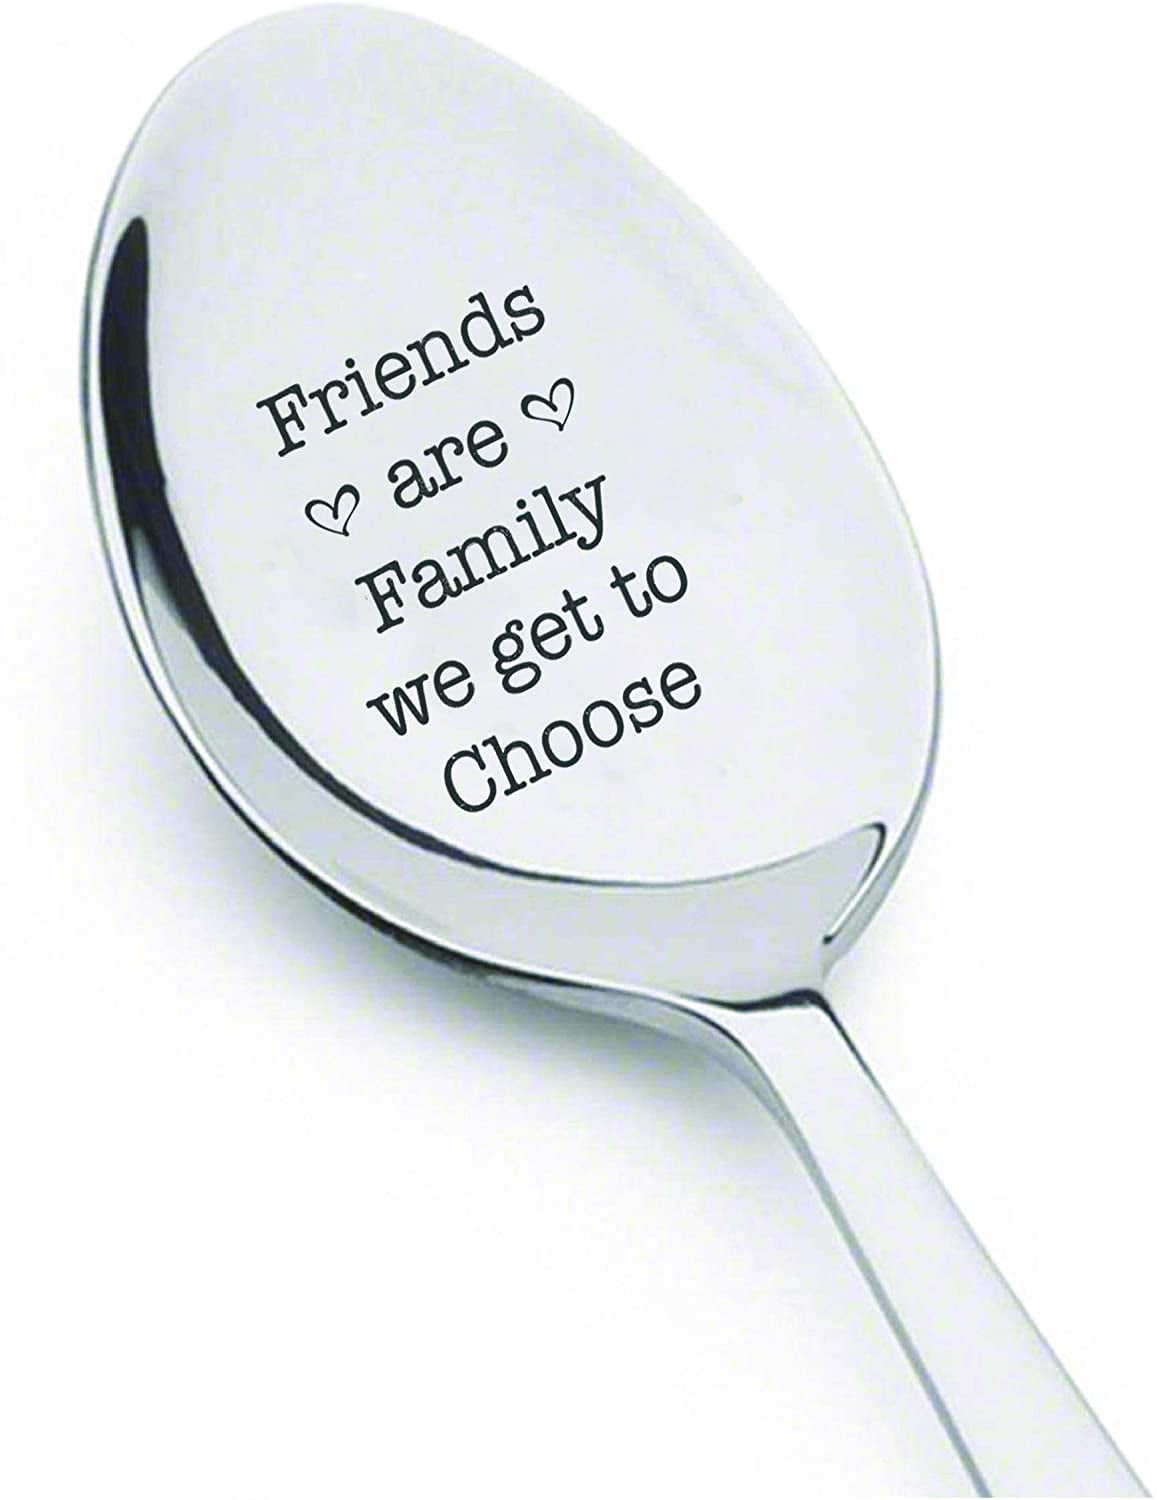 Friends Like You Make Life Sweet Cute Friends Gift Engraved Spoon Friendship Day Gift unique funny gift Coffee lovers gift idea